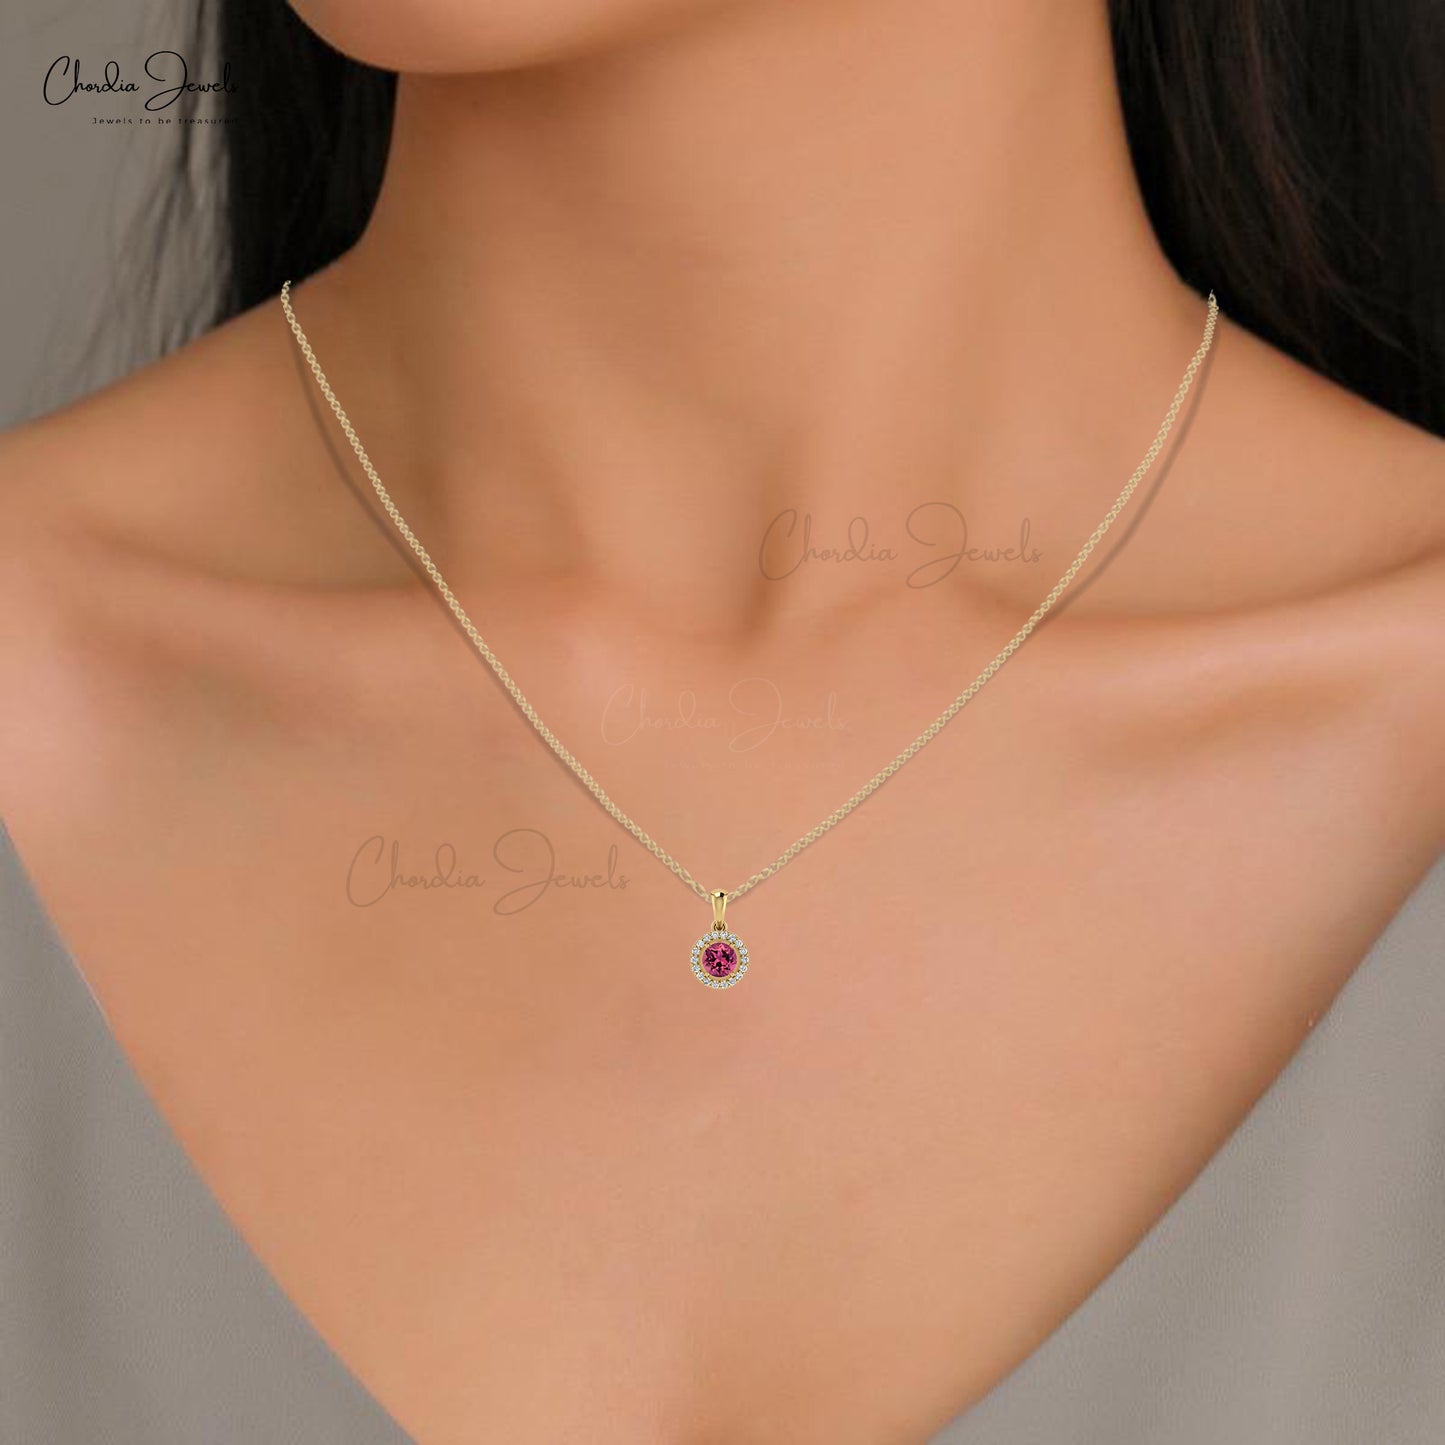 Natural Pink Tourmaline 4mm Brilliant Round Cut Gemstone Pendant 14k Solid Gold White Diamond Pendant For Her